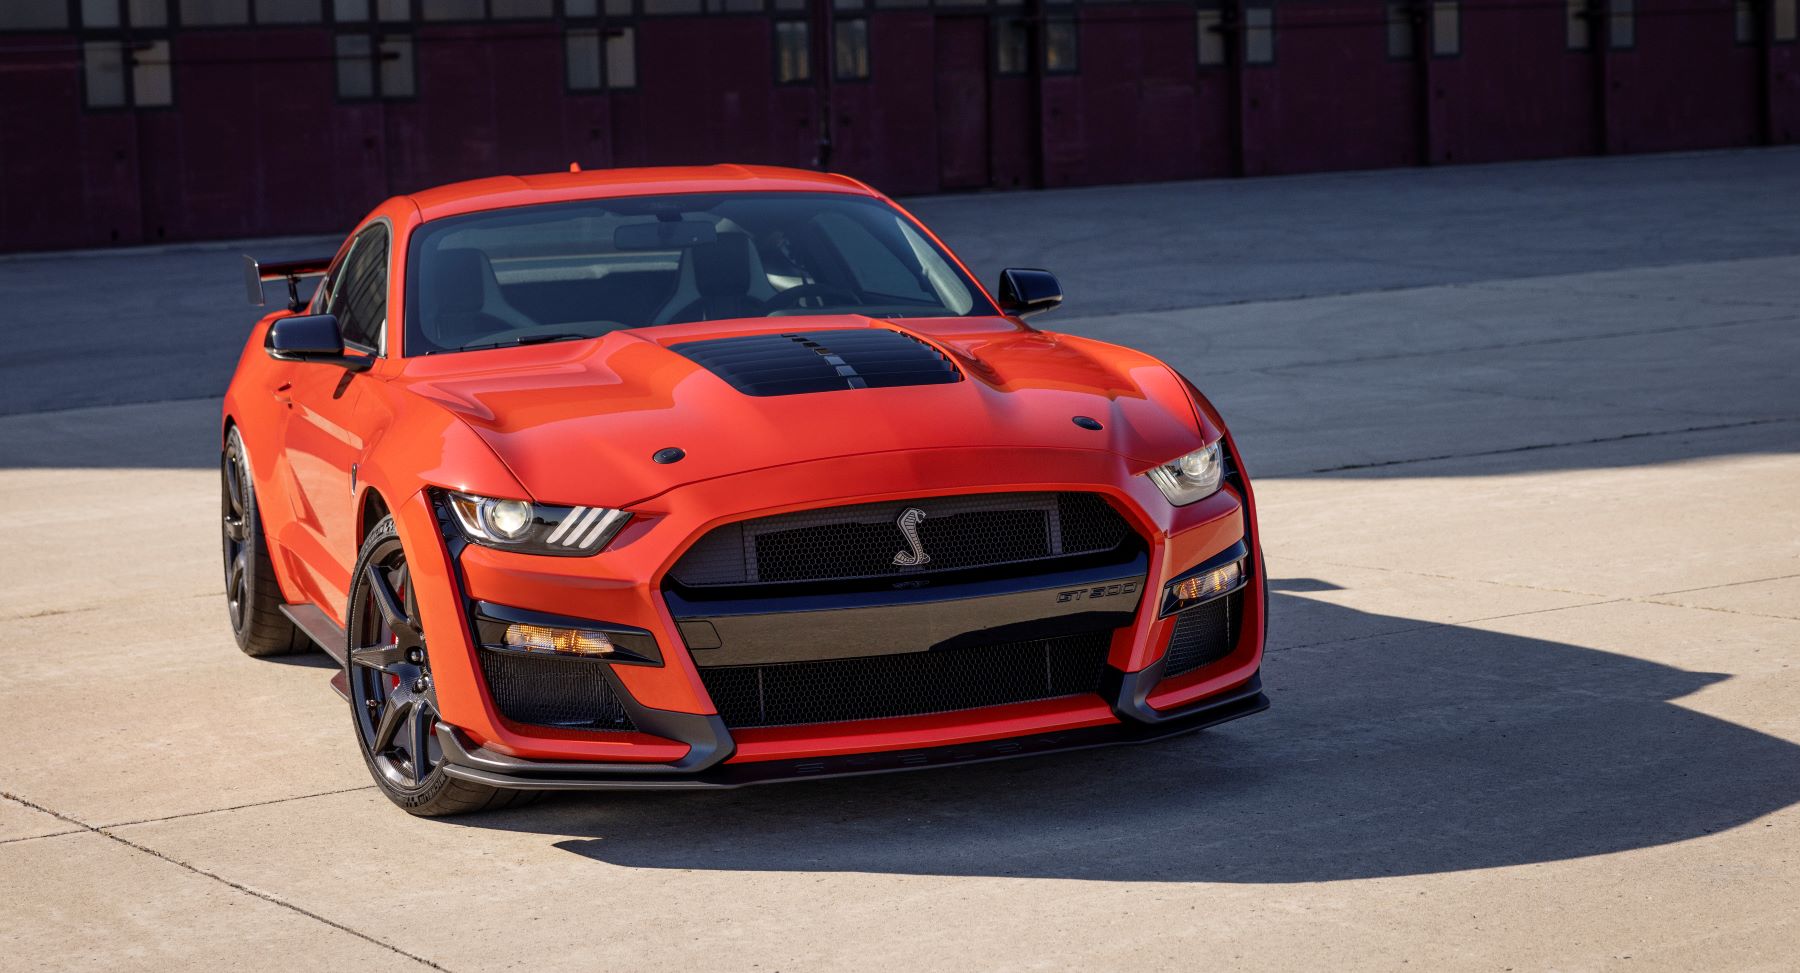 A red 2022 Ford Mustang Shelby GT500 sports car/pony car/muscle model